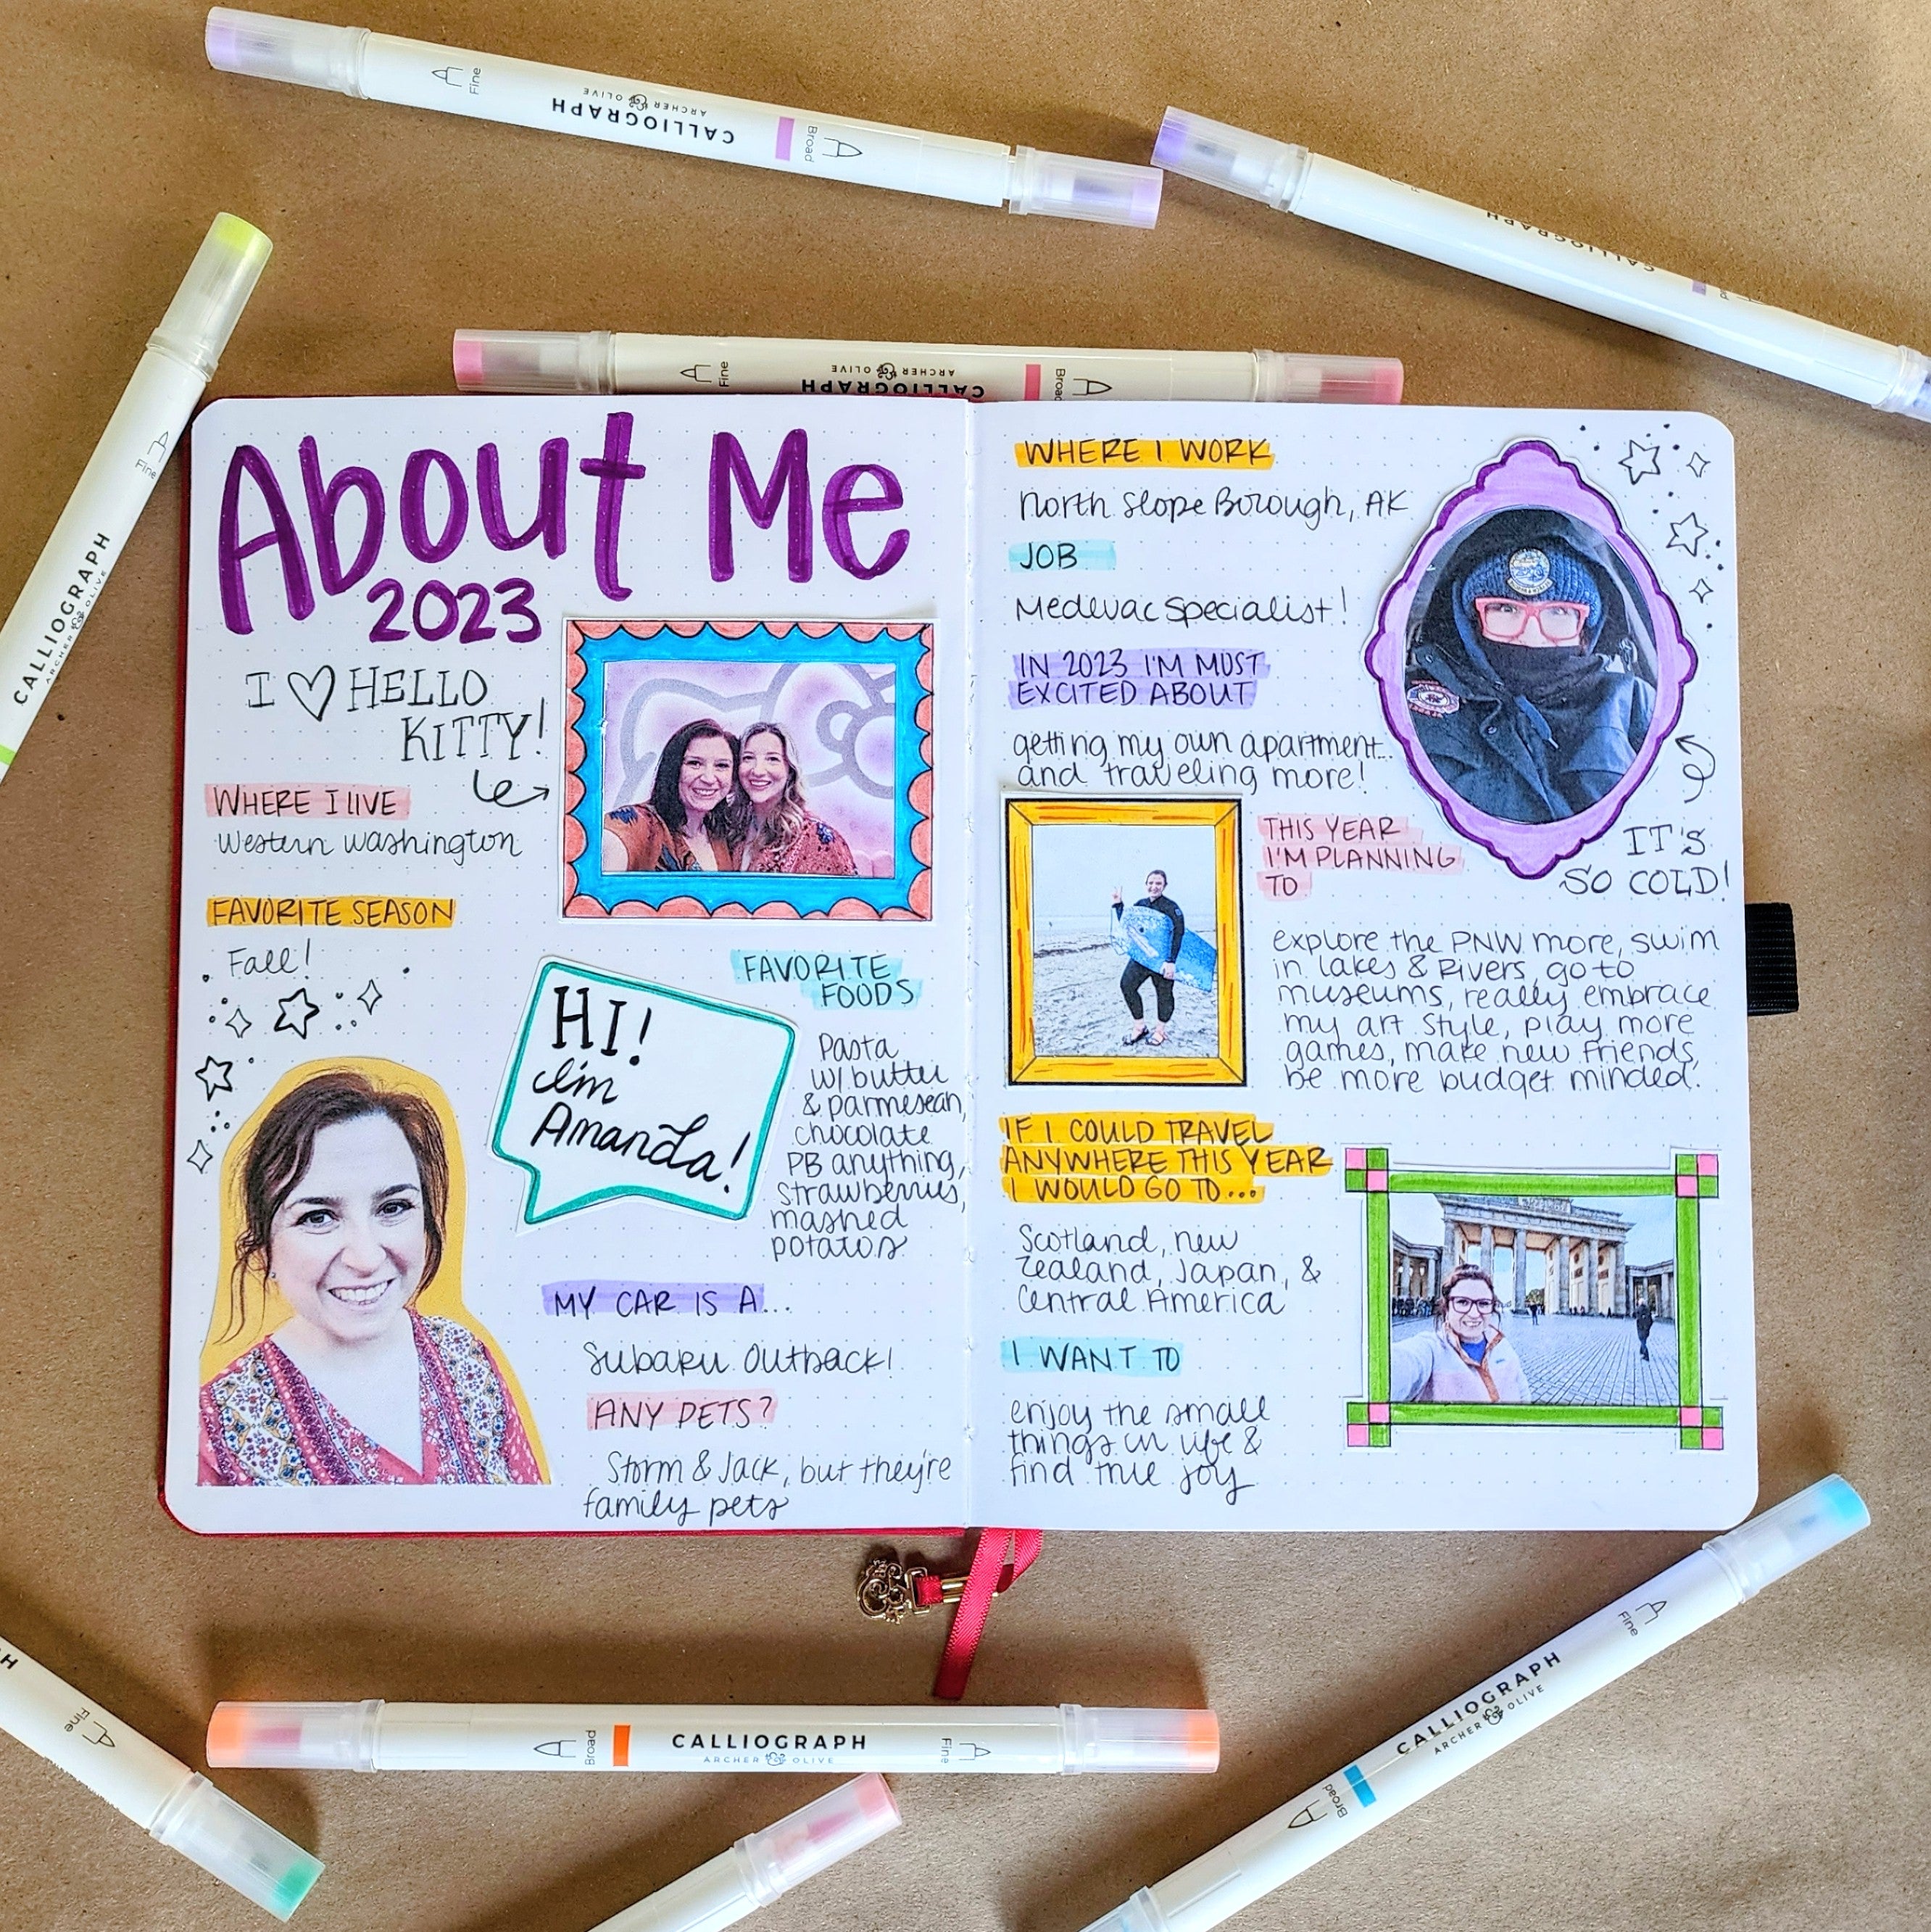 About Me bullet journal spread